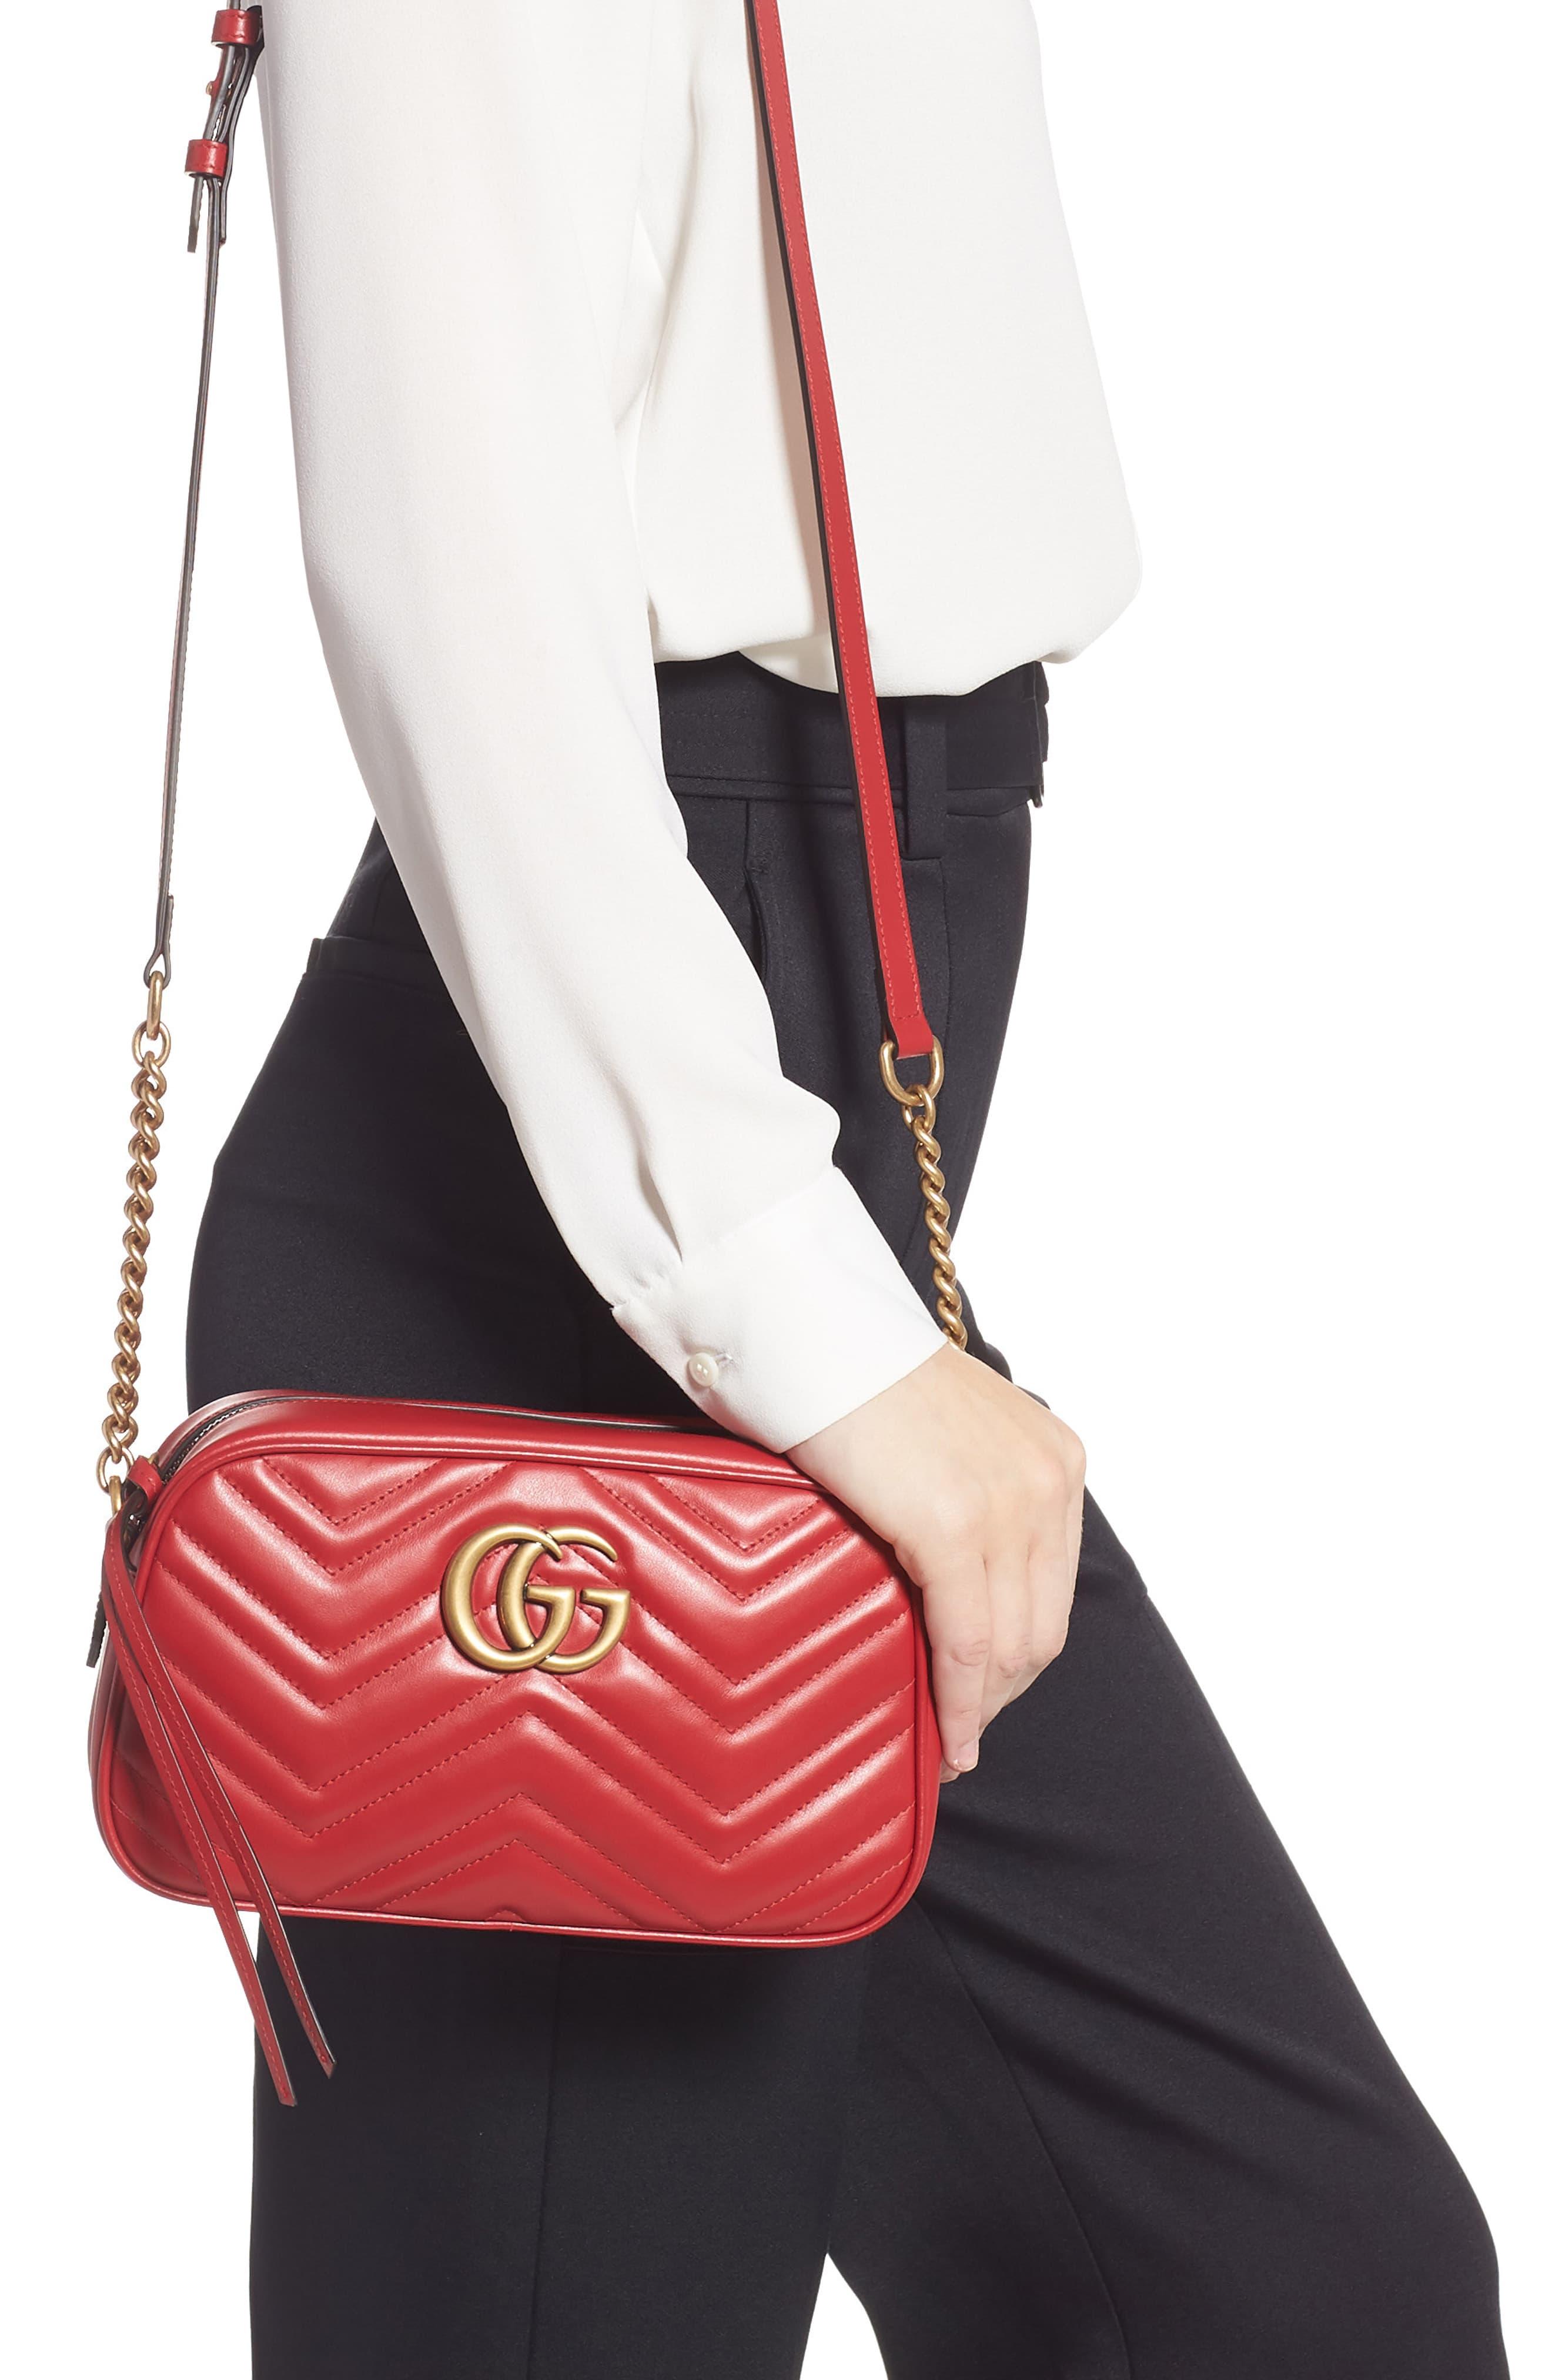 gucci marmont camera bag red